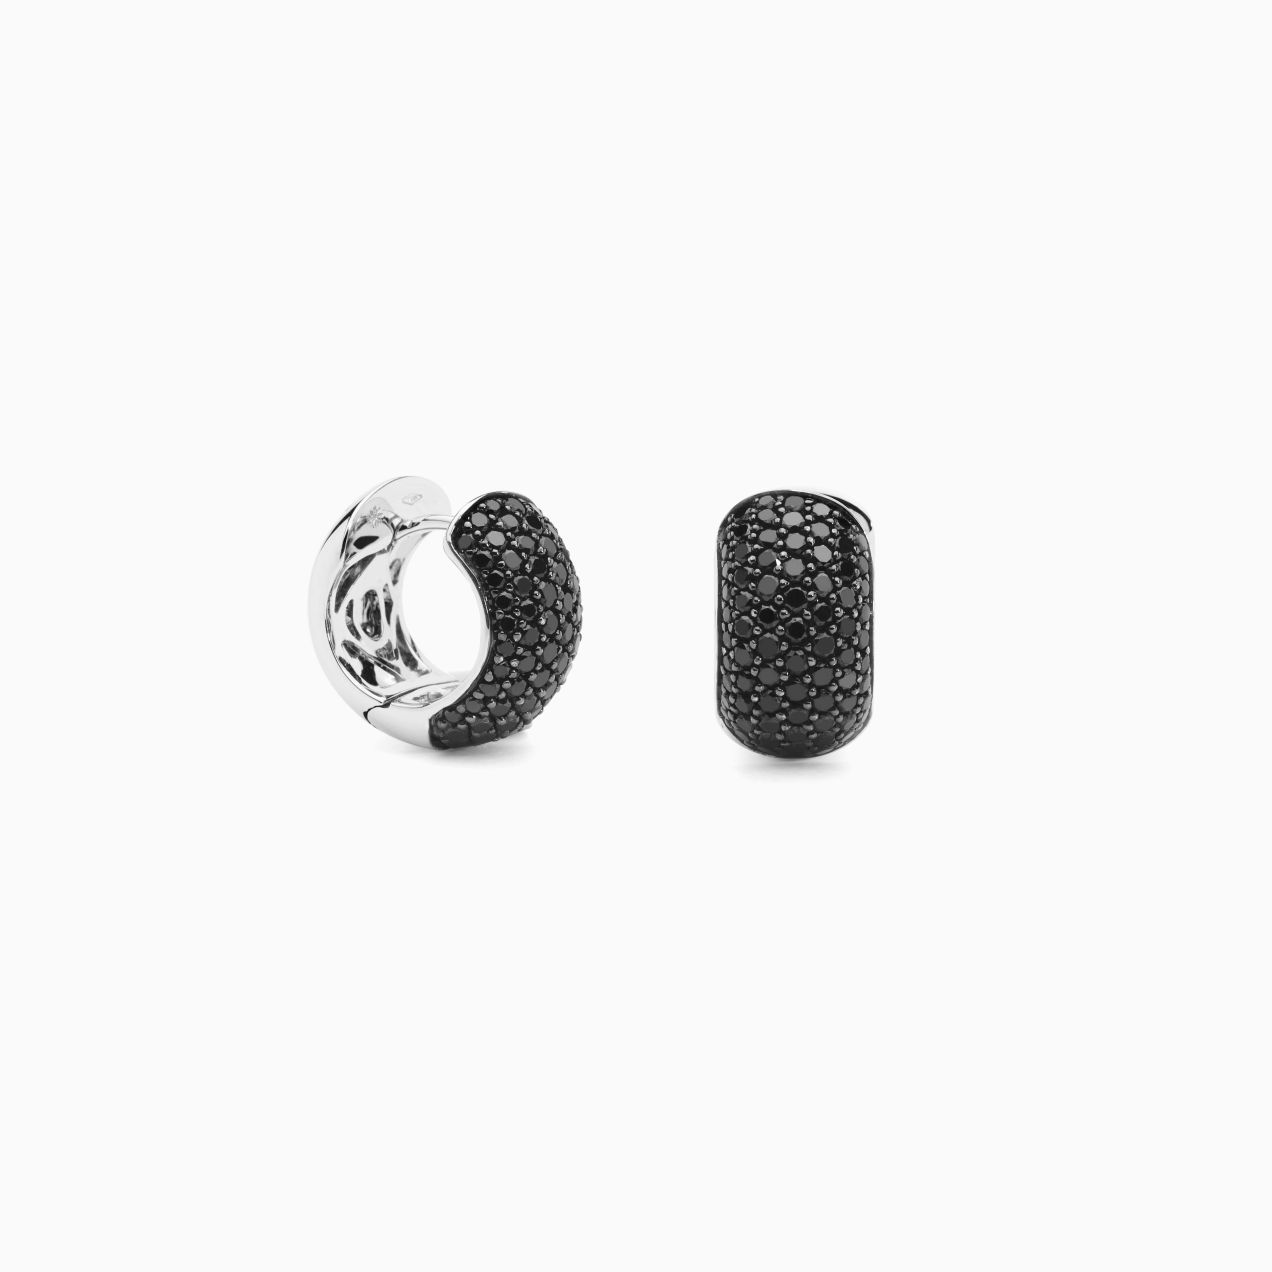 White gold ring earrings with black diamonds